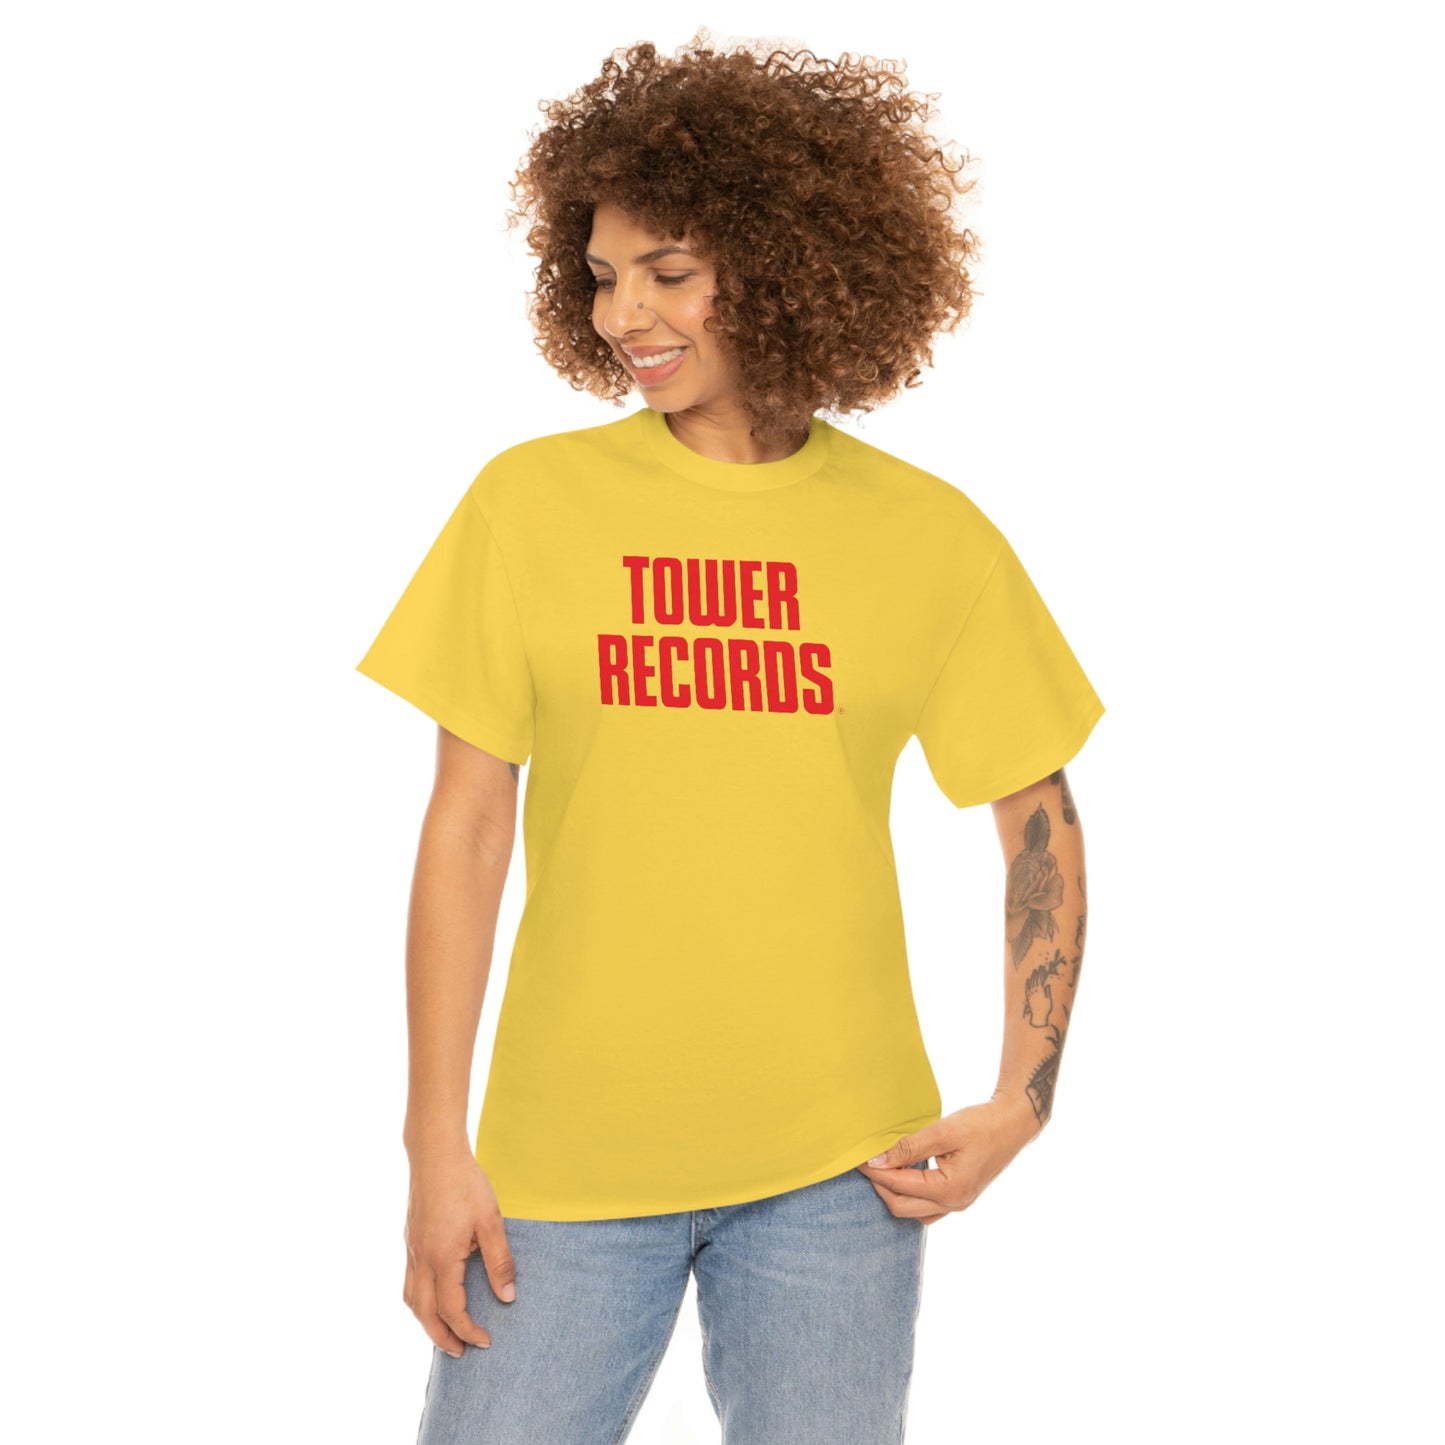 Tower Records T-Shirt